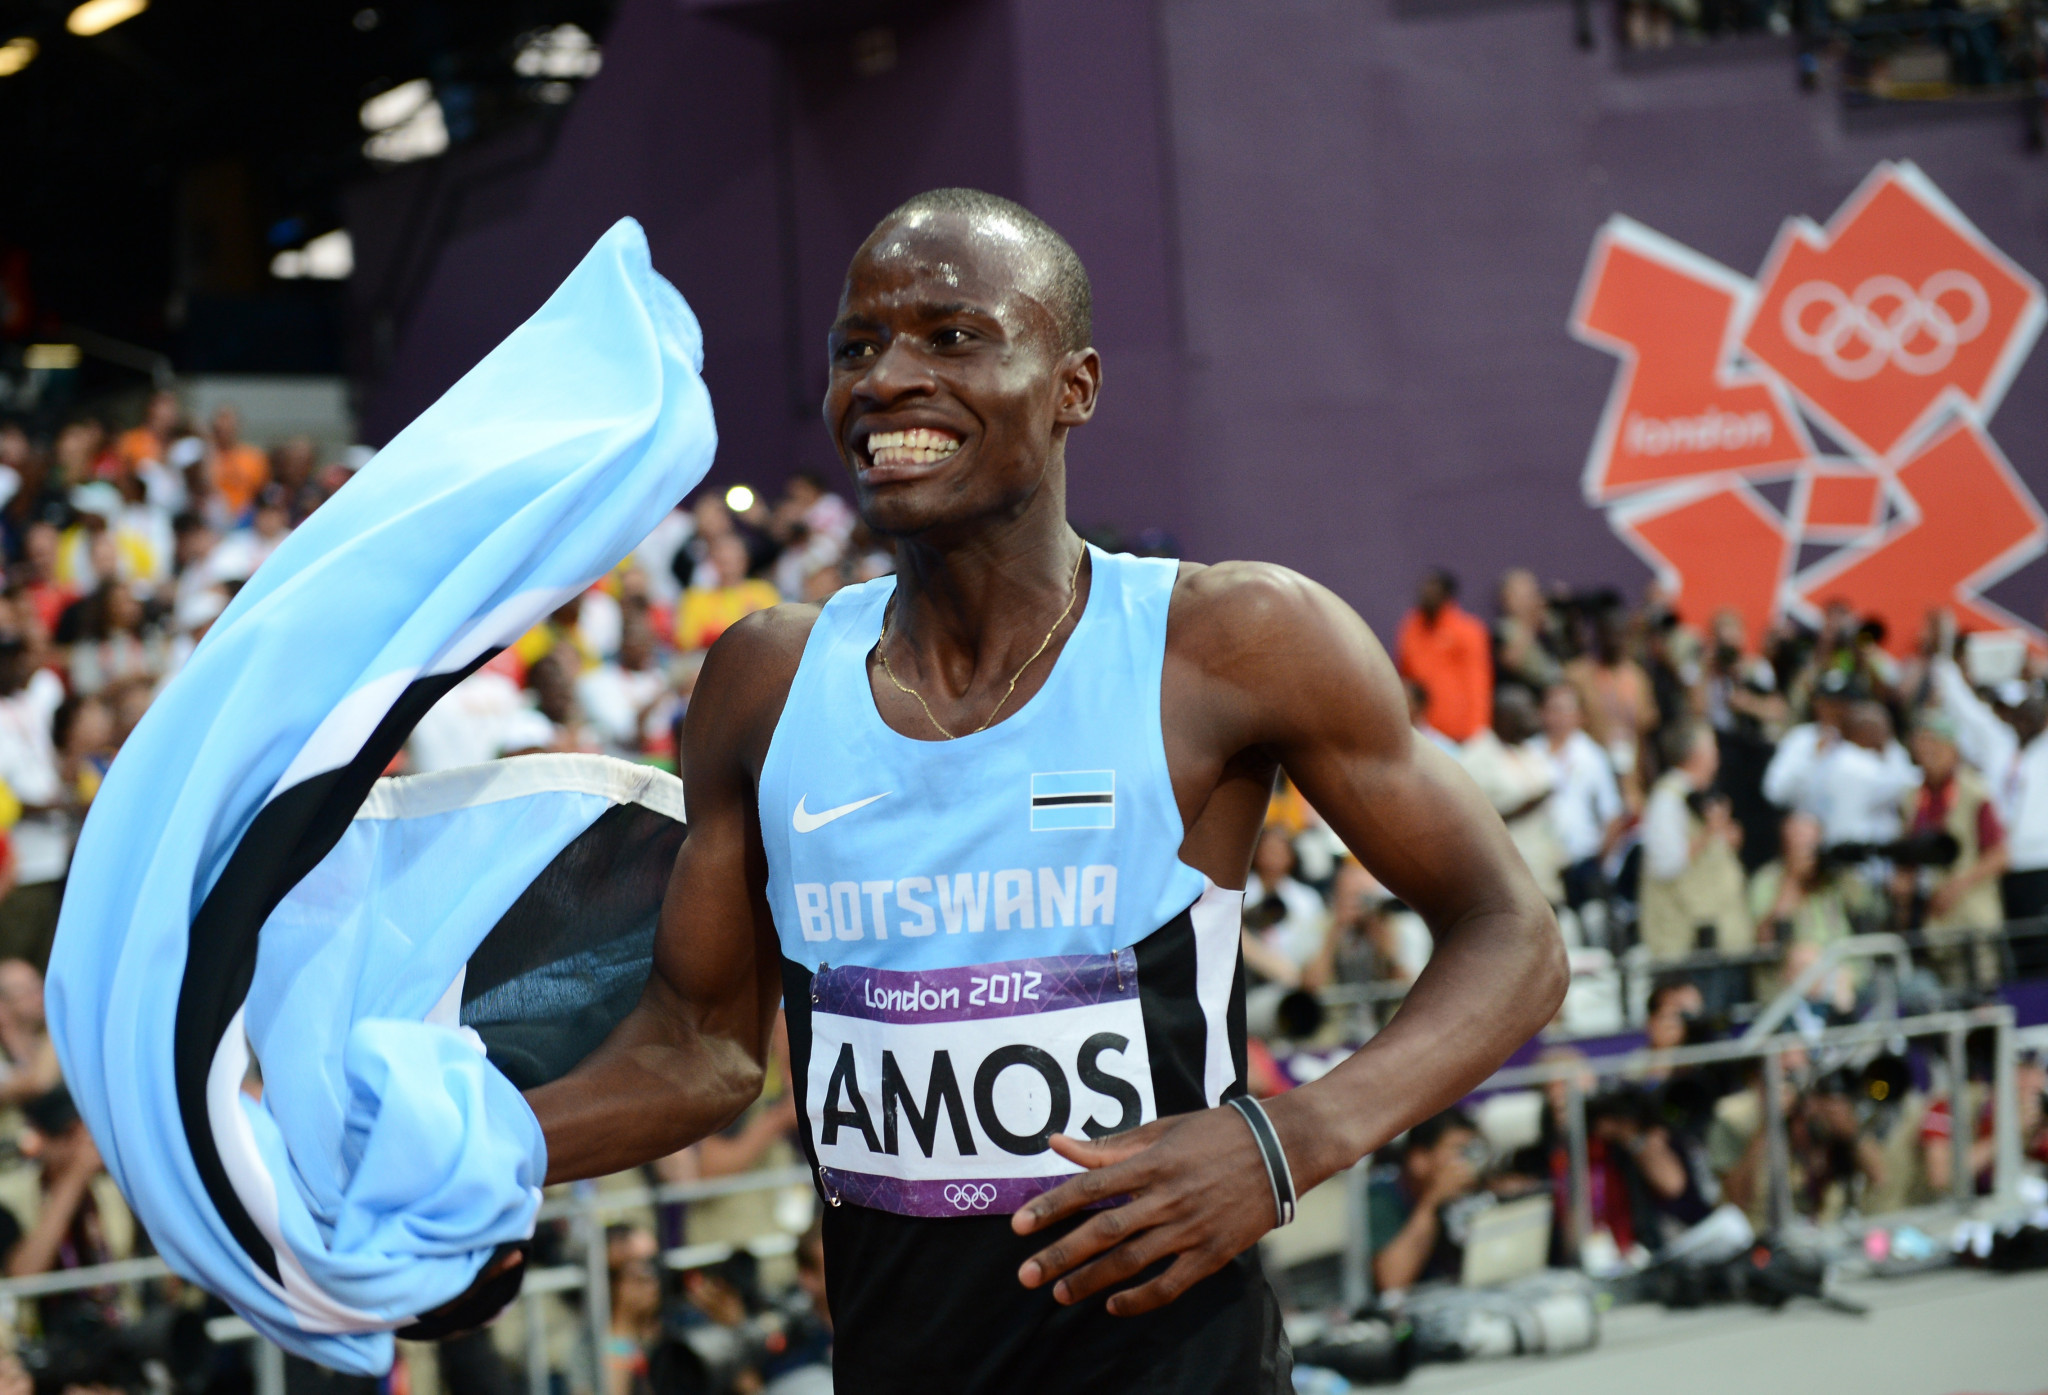 Nijel Amos won Botswana's first Olympic medal at London 2012 ©Getty Images